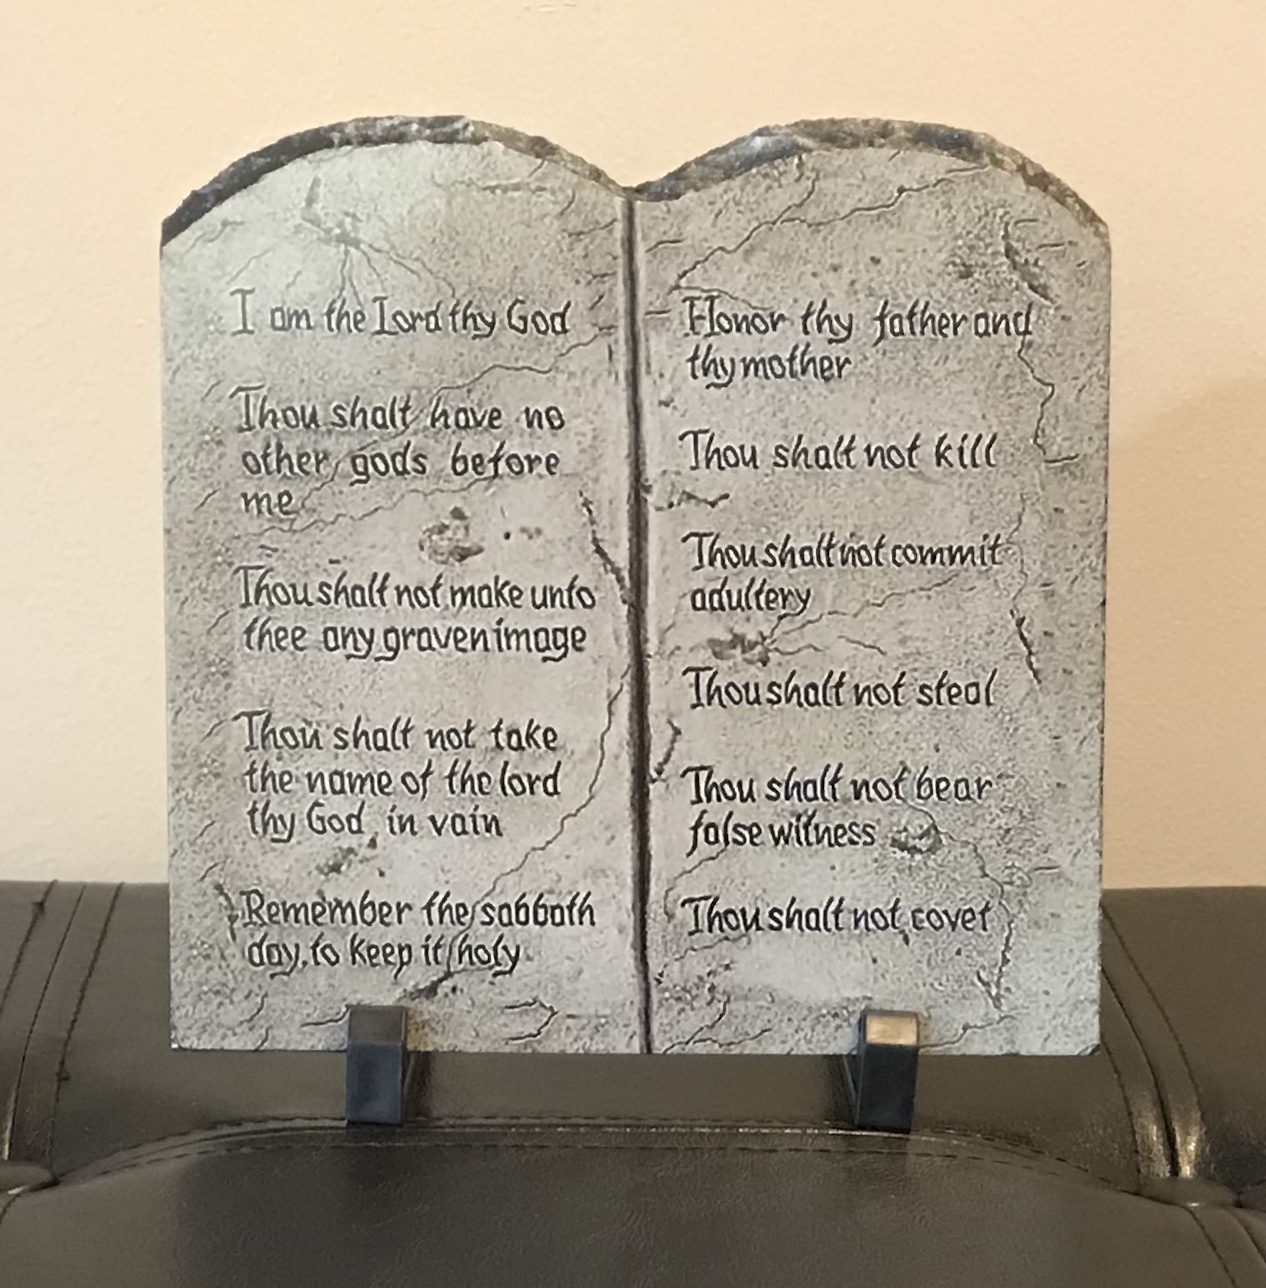 The 10 Commandments made with sublimation printing